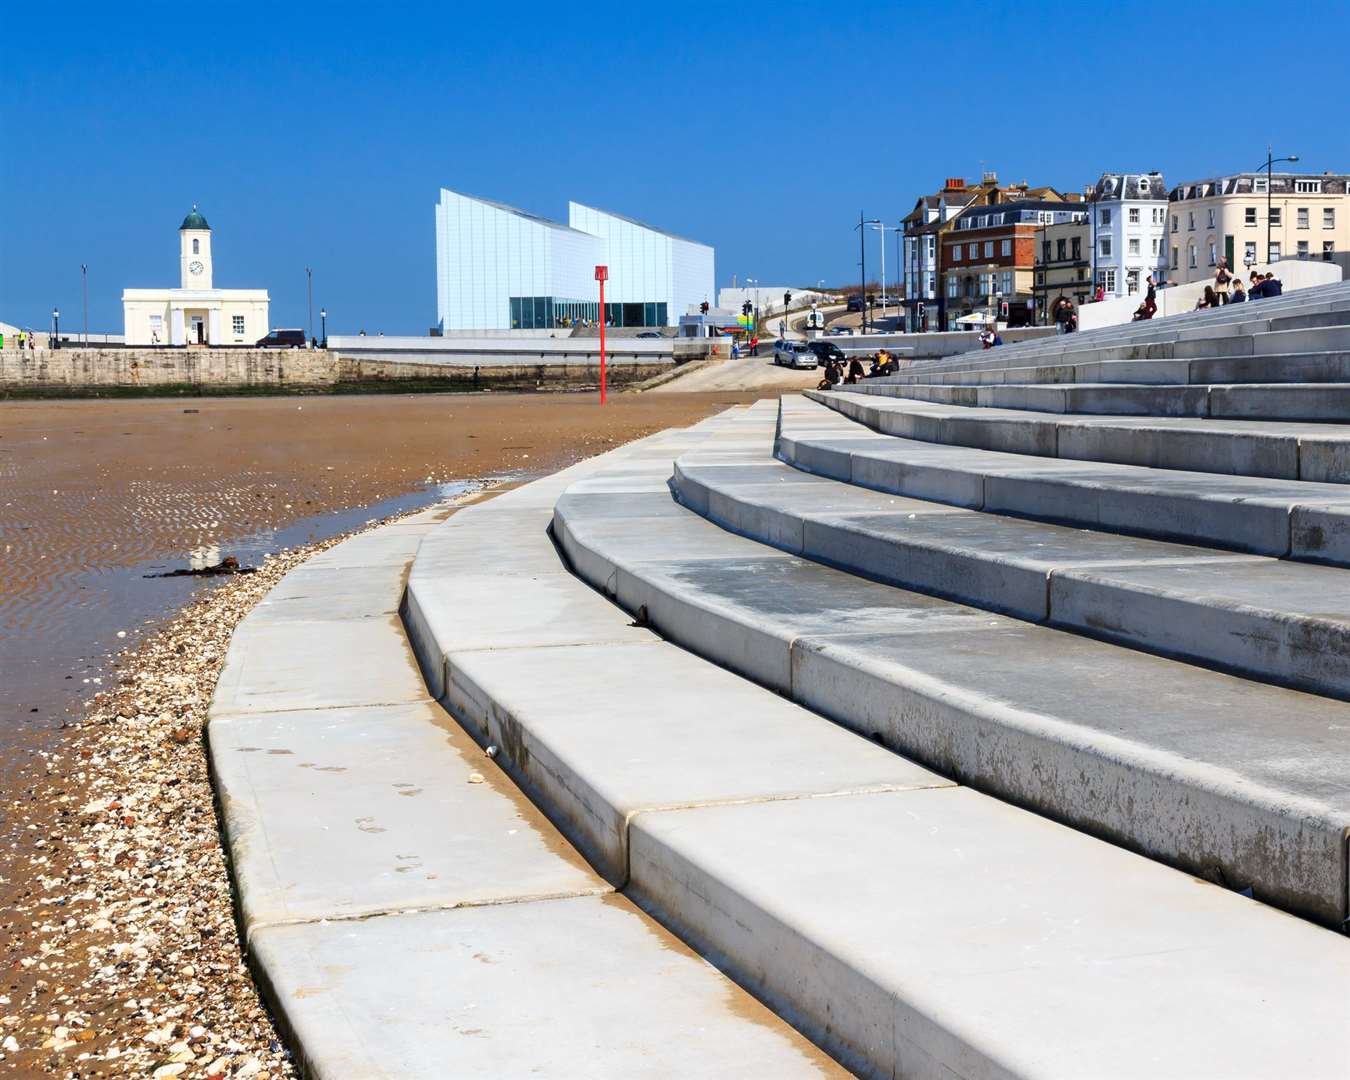 Public toilets on Margate seafront near the clock tower are shut but the council is planning to install temporary facilities for the summer